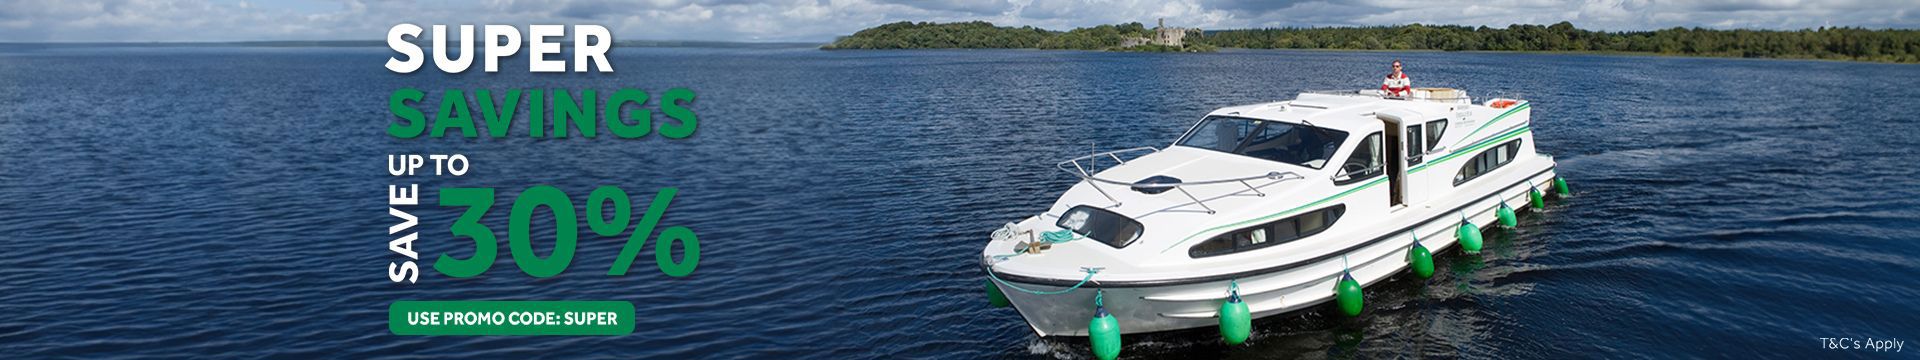 Emerald Star Boating Holiday Discount